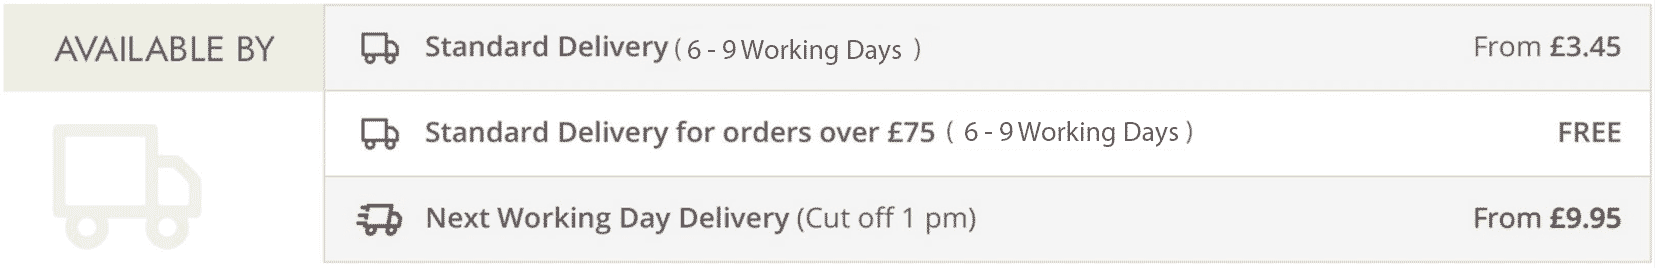 Delivery times 6 - 9 days